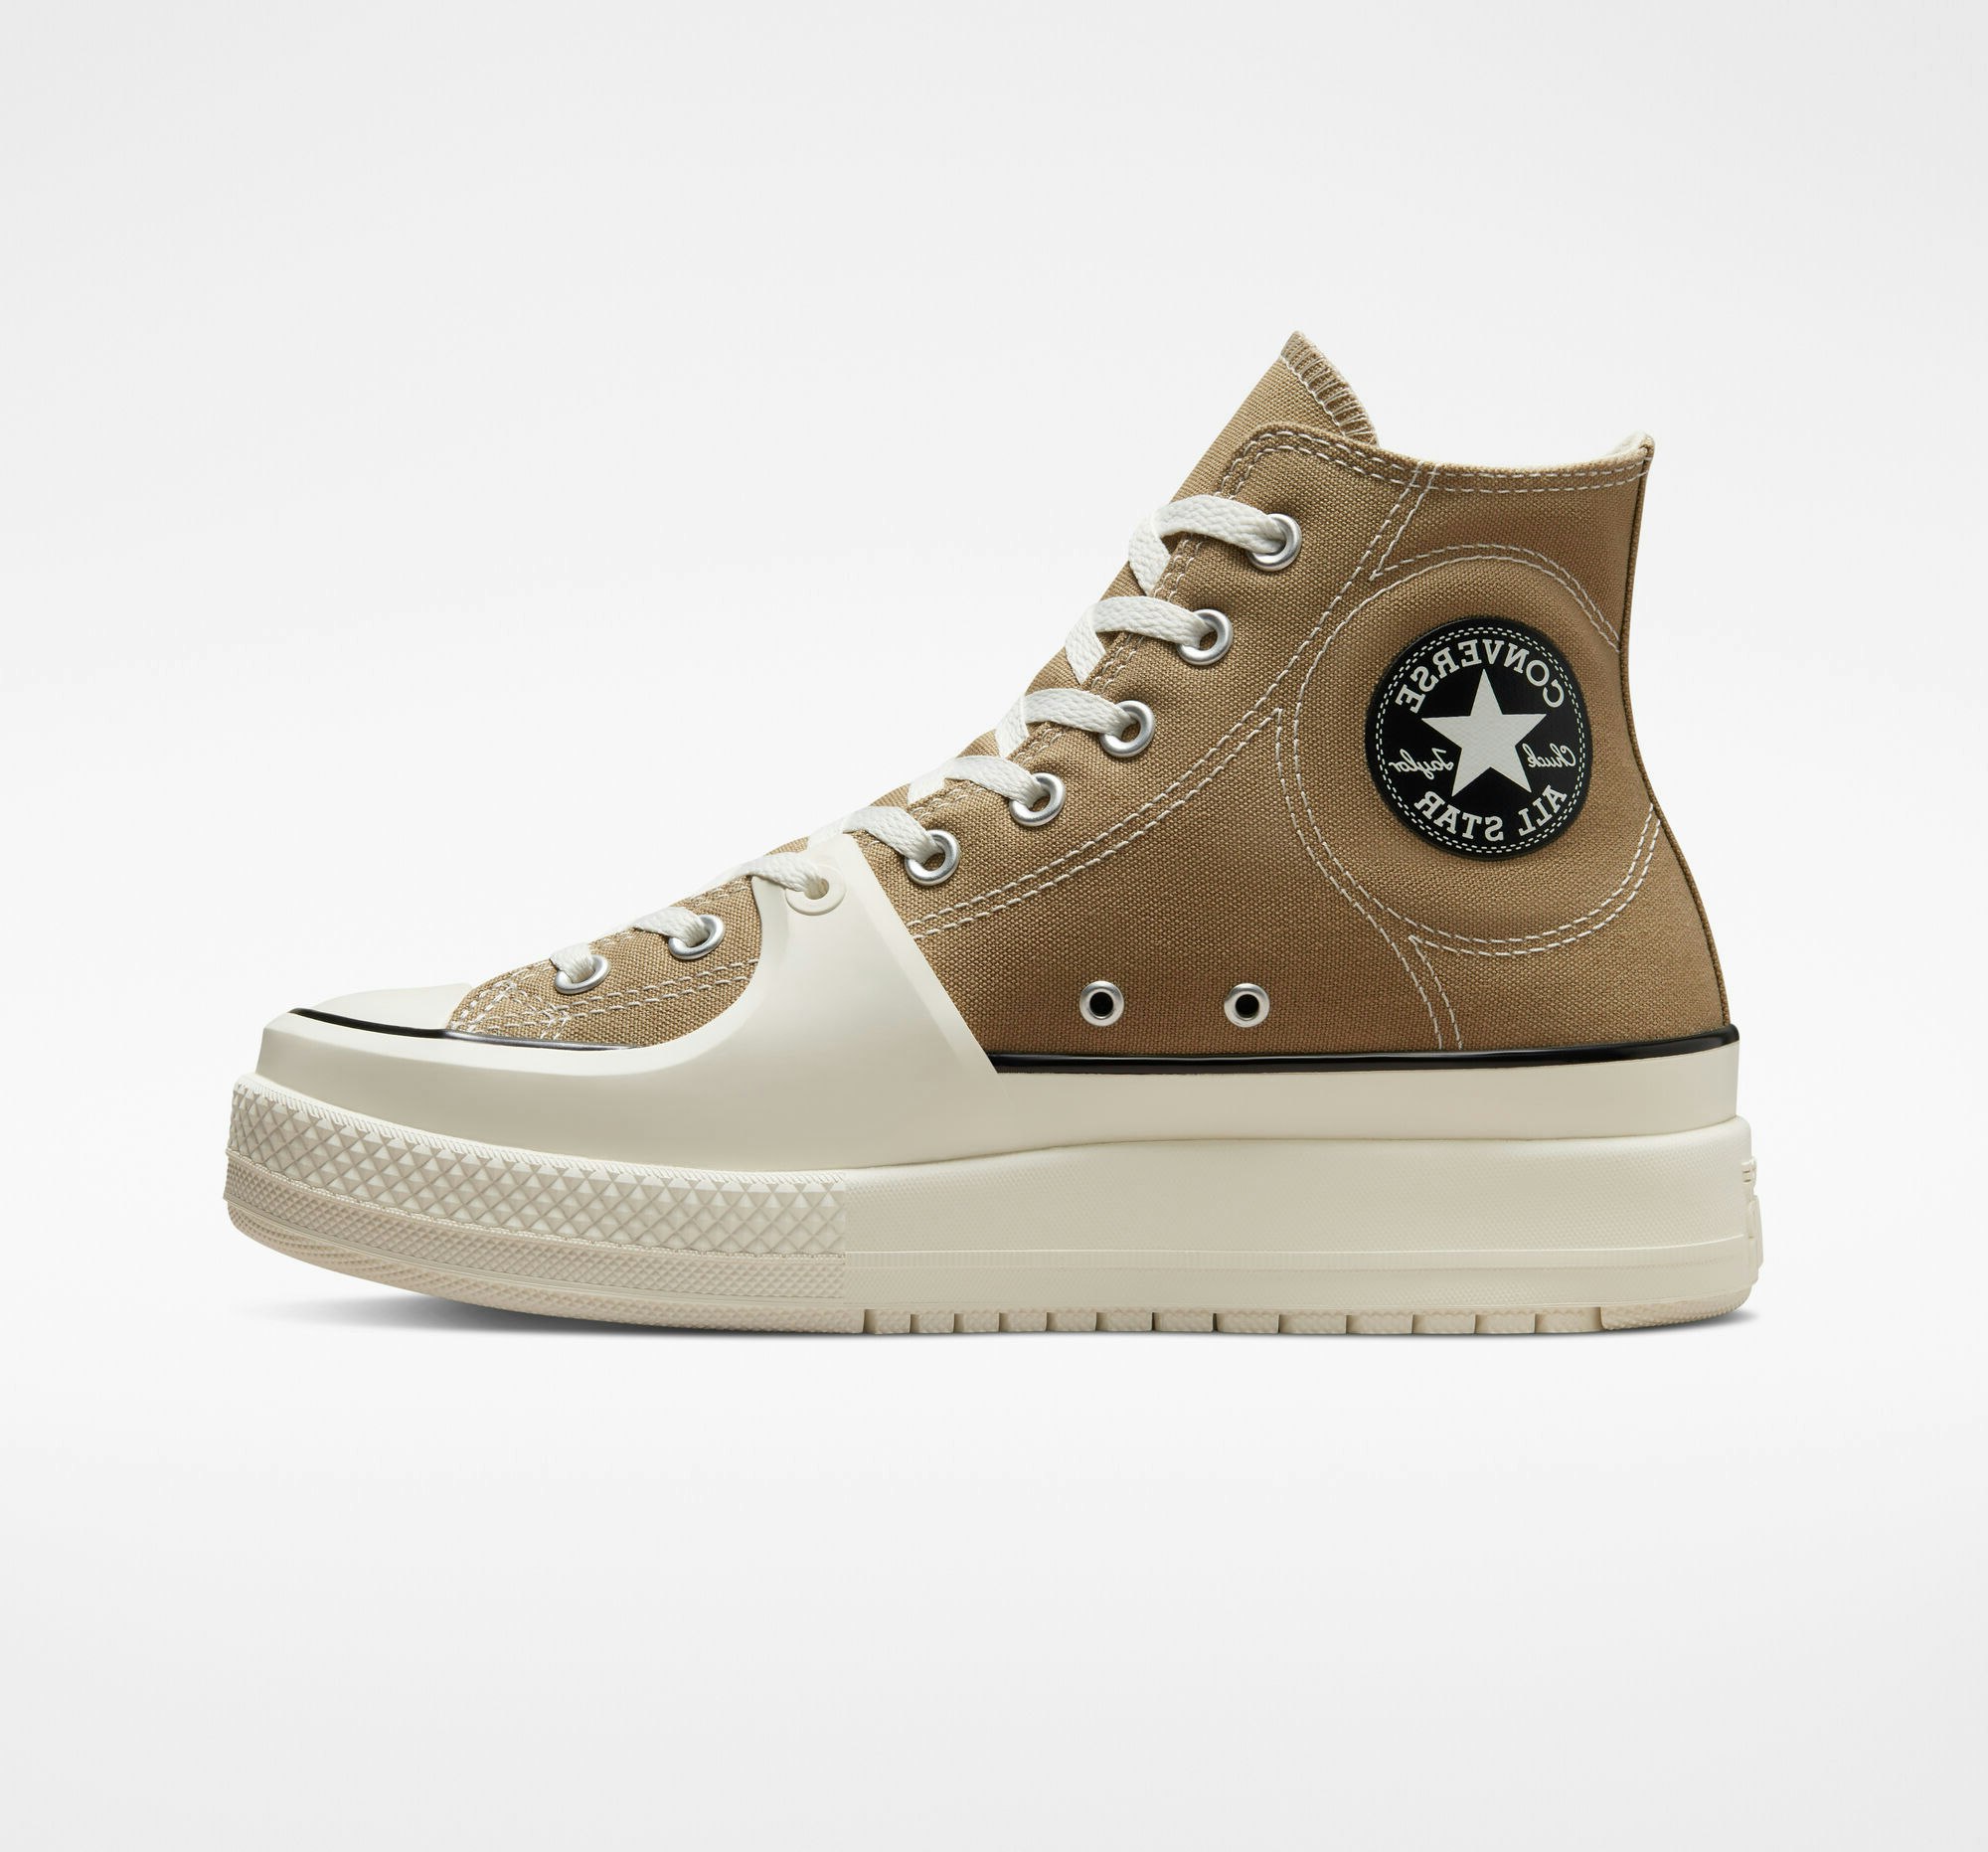 Converse Chuck Taylor All Star Construct "Roasted"